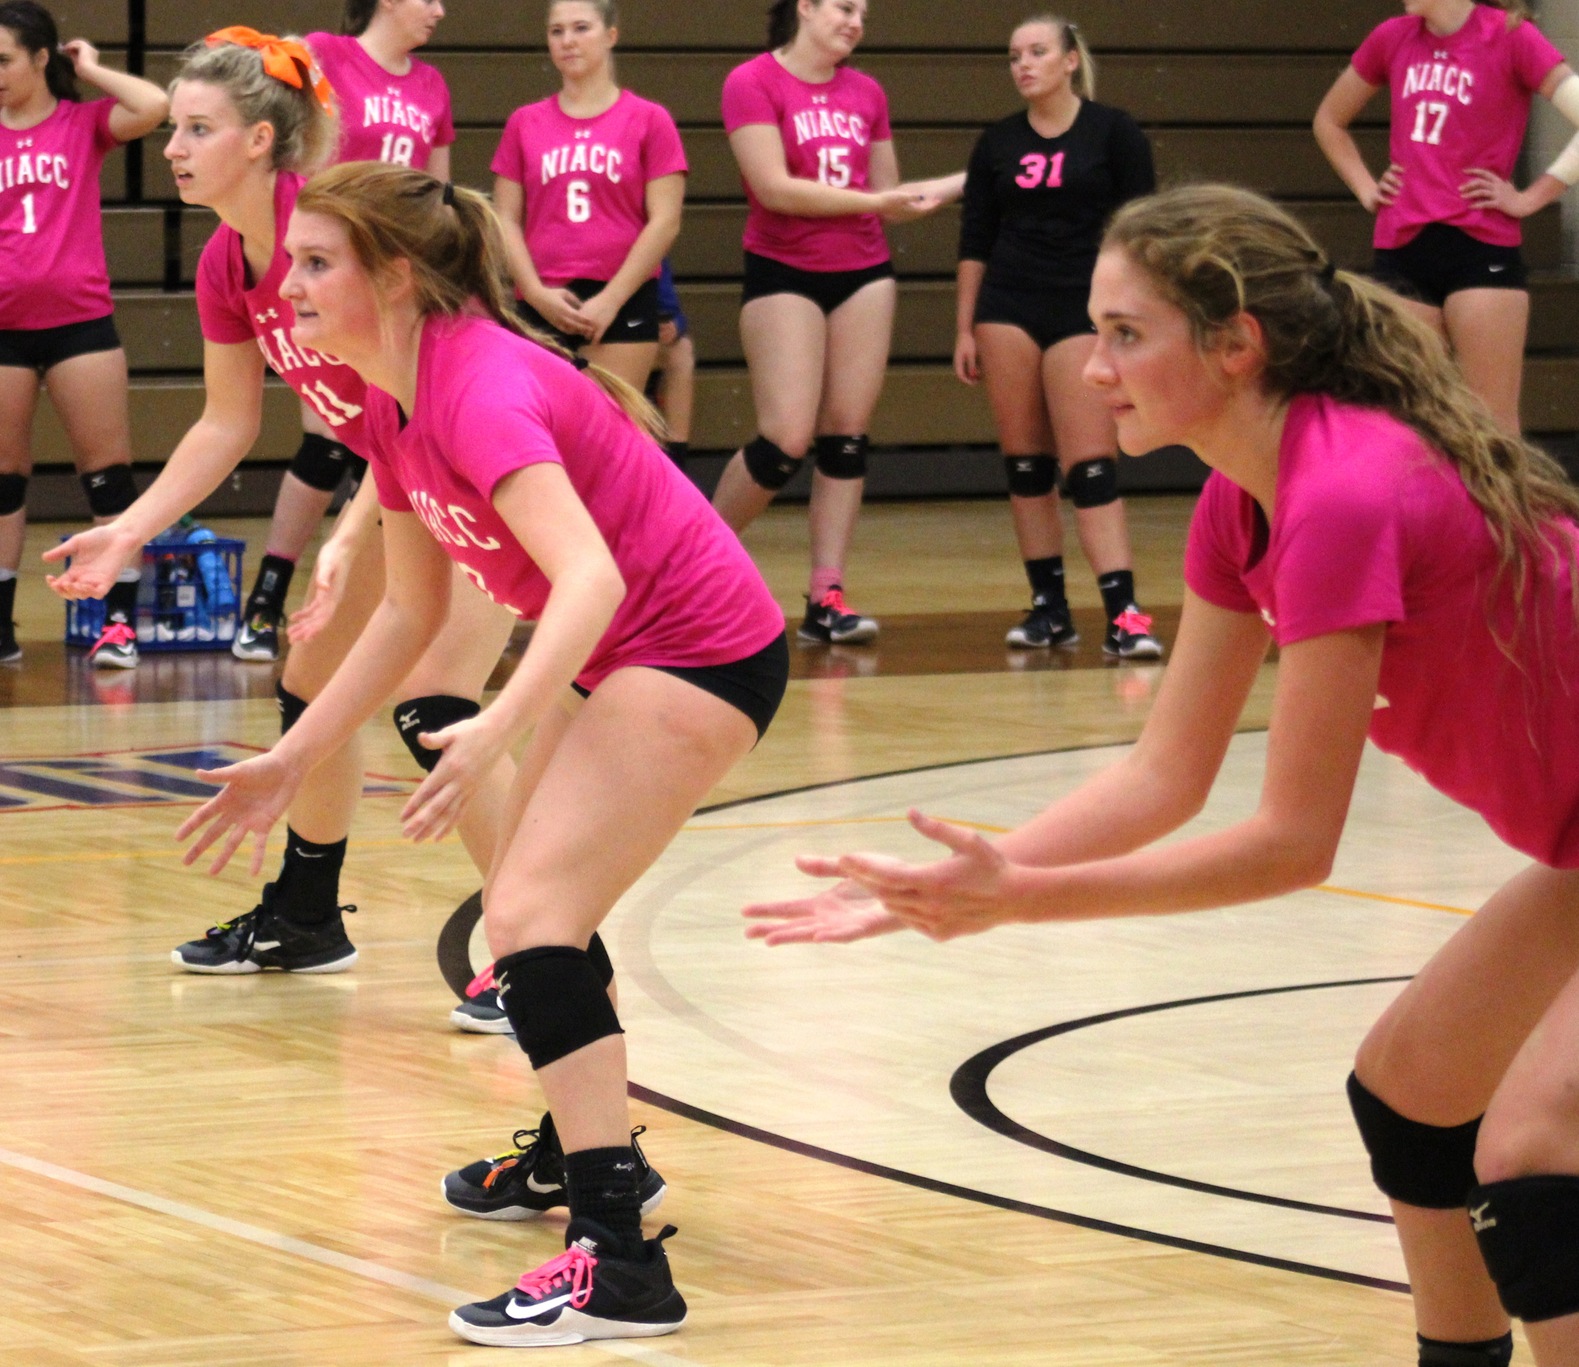 NIACC's Shelby Heston, Connor Gauch and Hannah Wagner get ready for the serve in last Thursday's Think Pink match.